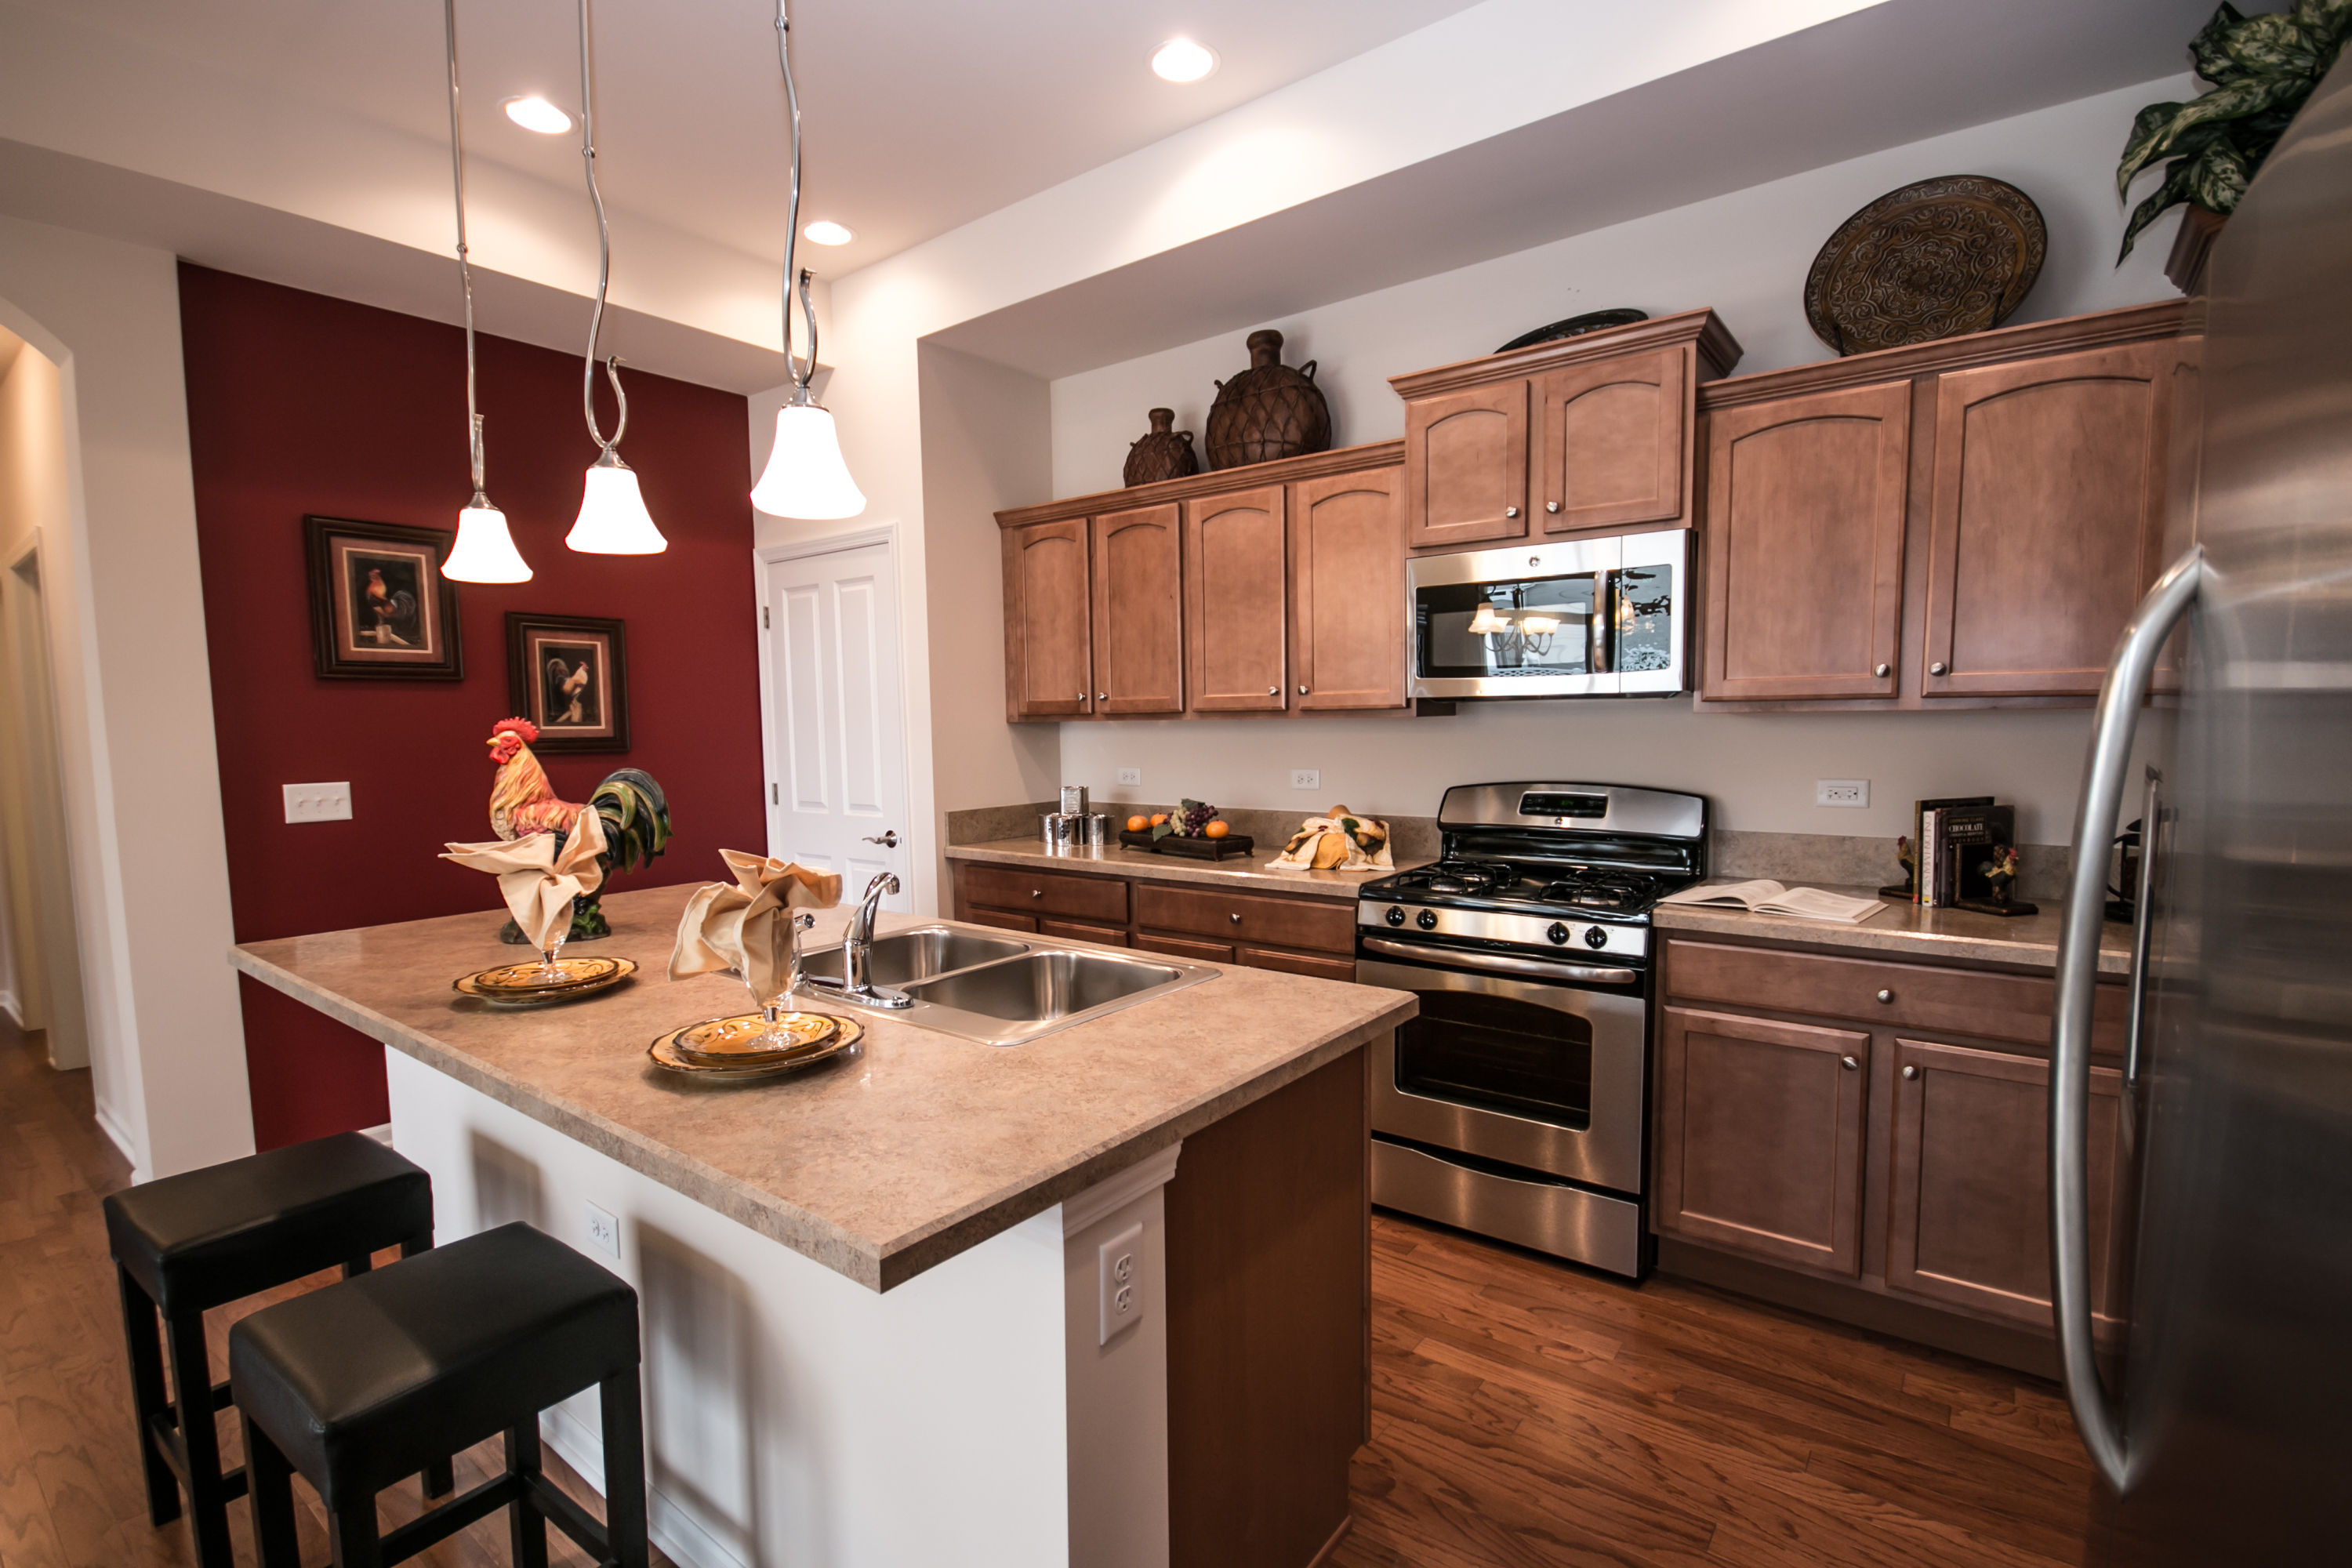 The Promenade Ranch Model offers a roomy kitchen with island.